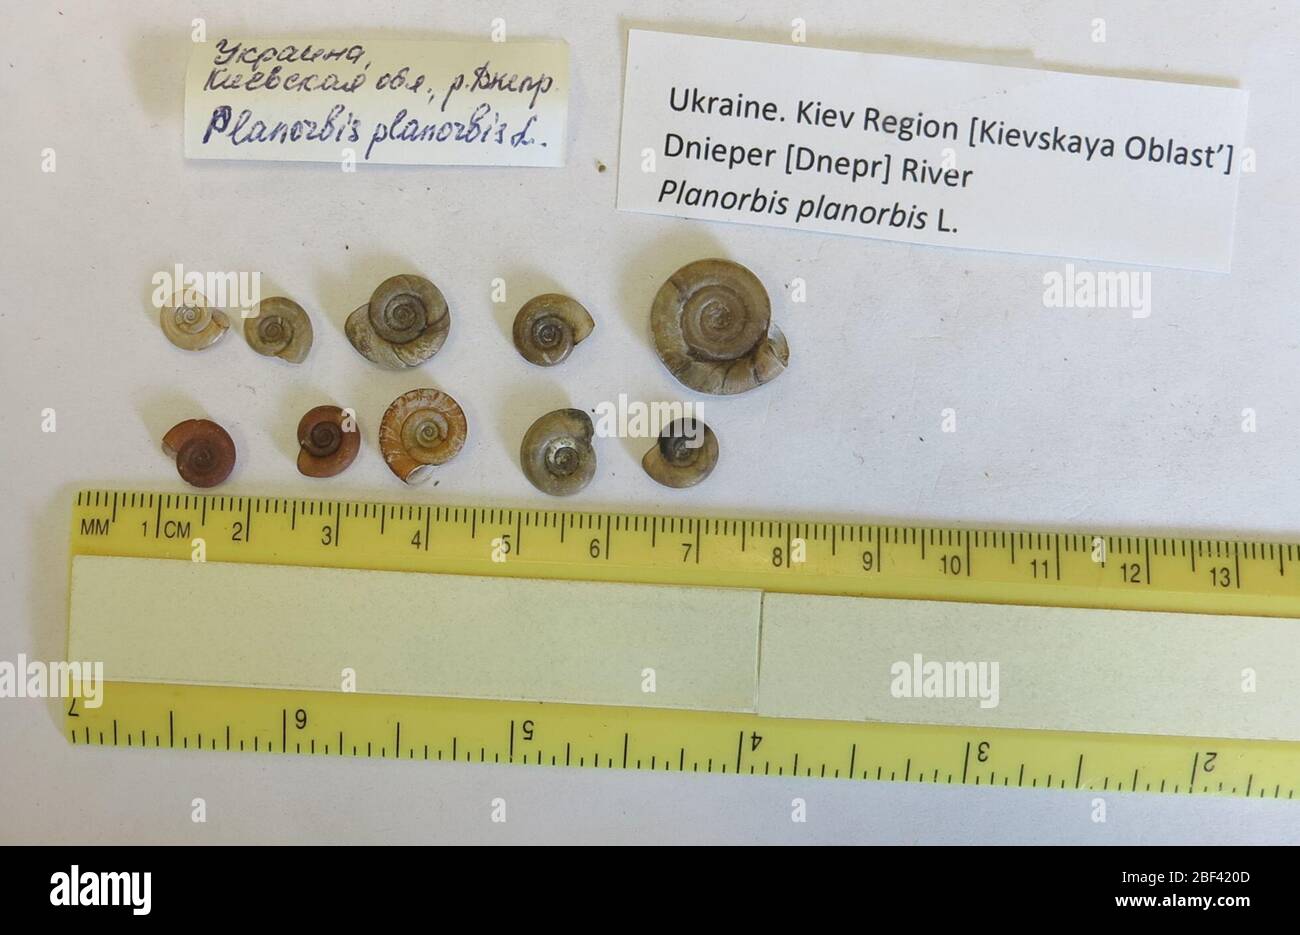 Planorbis planorbis. exchange from Central Museum of Natural history, Academy of Sciences of Ukrania SSR, Kiev, Lenin str. 15, USSR dtd 2 February 19785 Jul 201710 Stock Photo